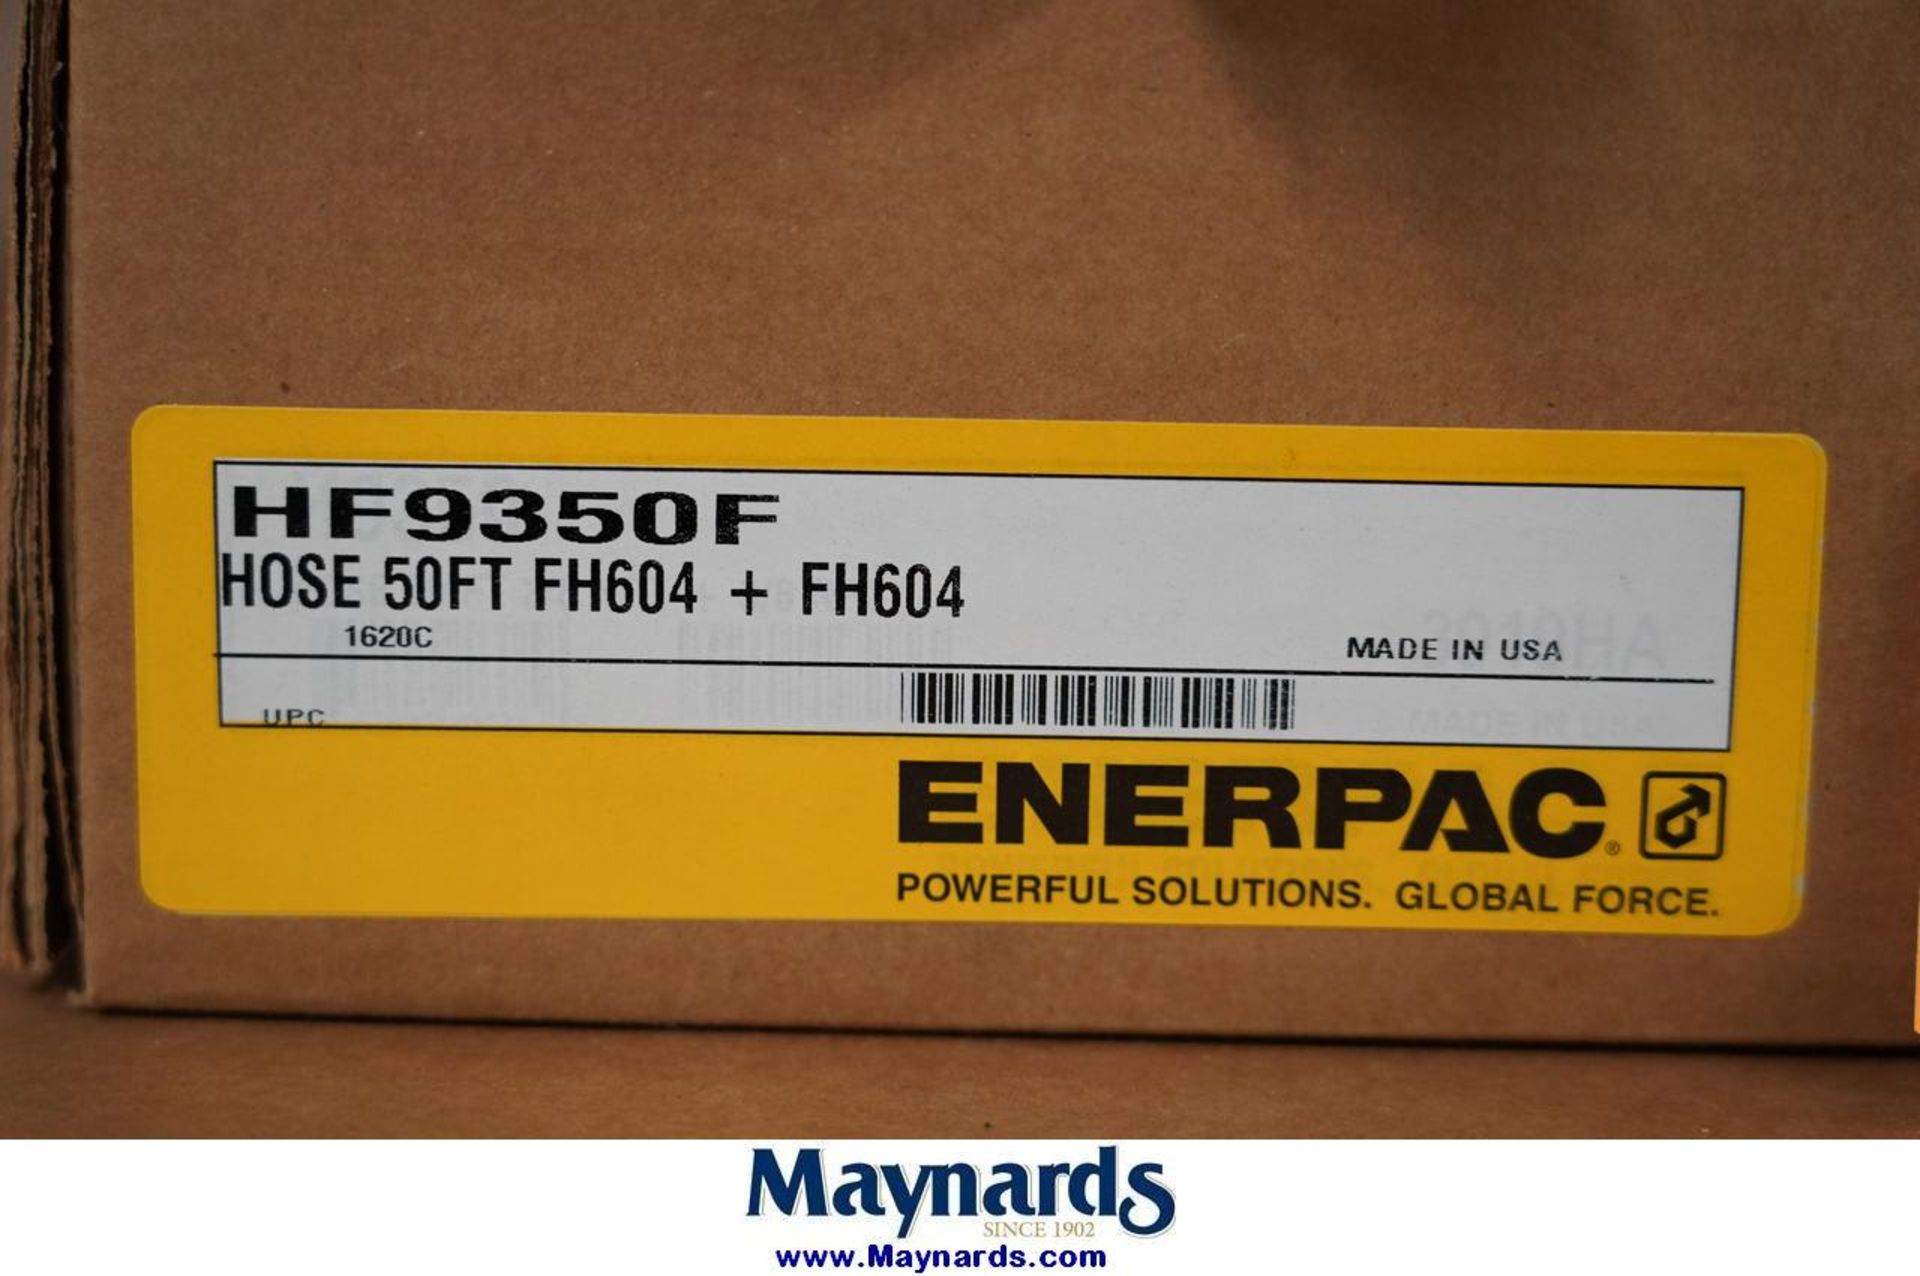 Enerpac HF9350F (1) 50 Ft Heavy Duty Rubber High Pressure Hydraulic Hose - Image 2 of 2